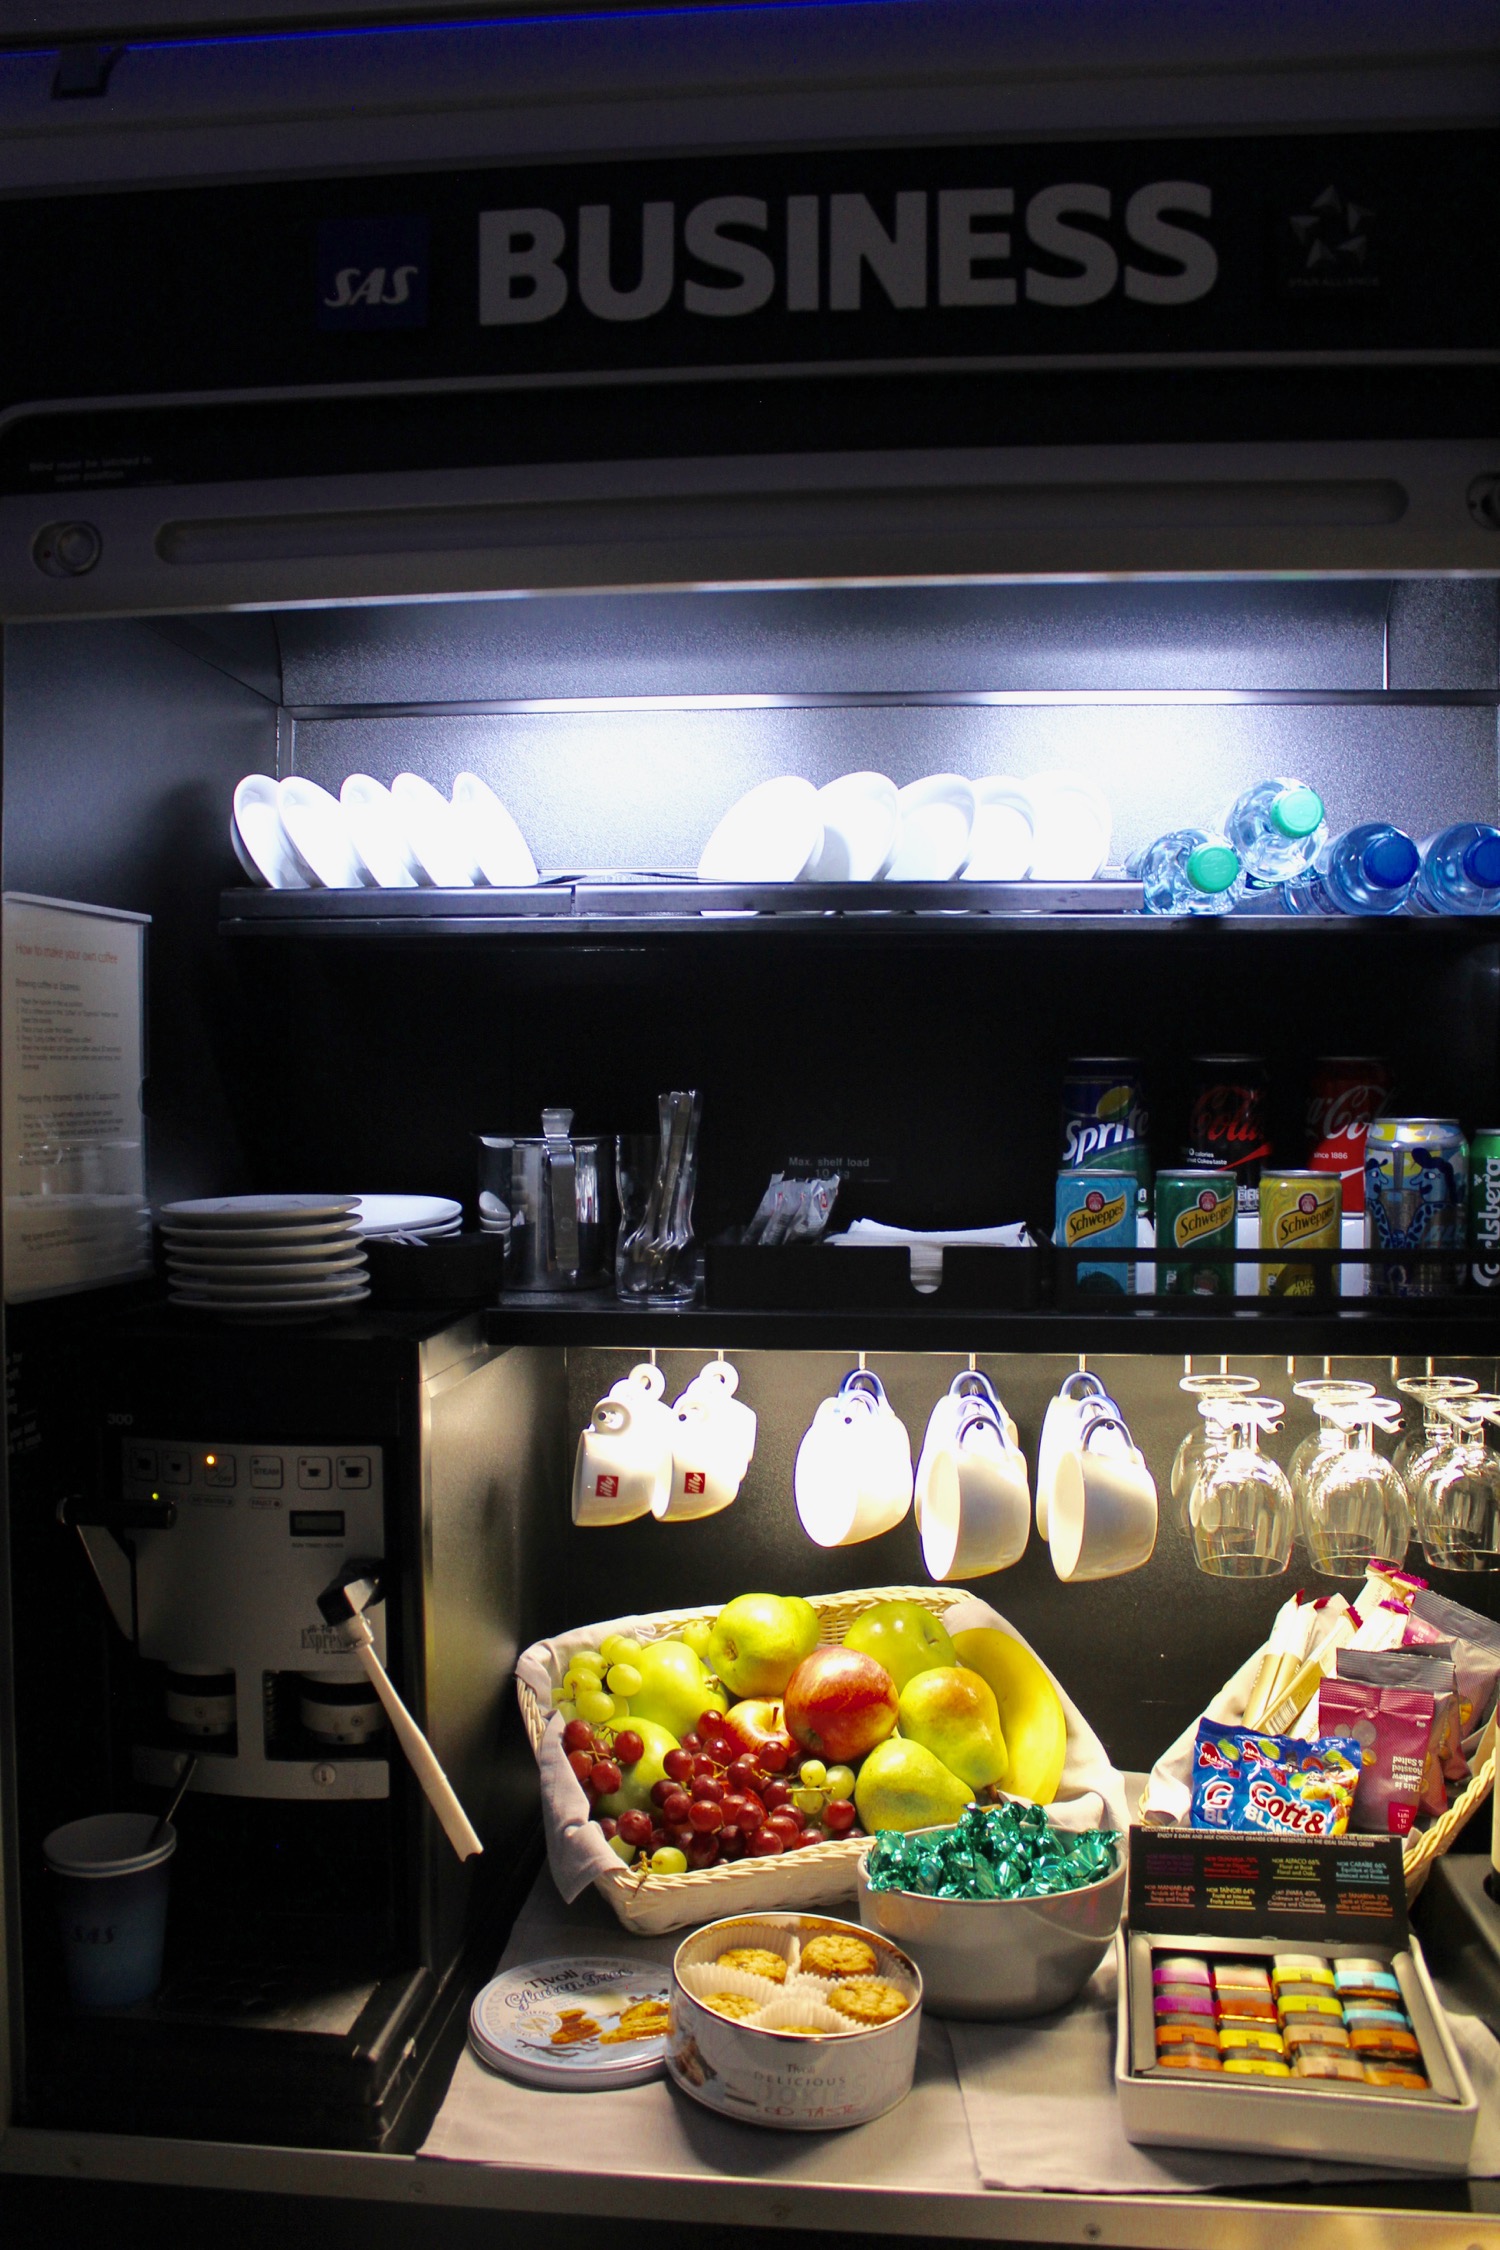 a refrigerator with a shelf full of food and drinks